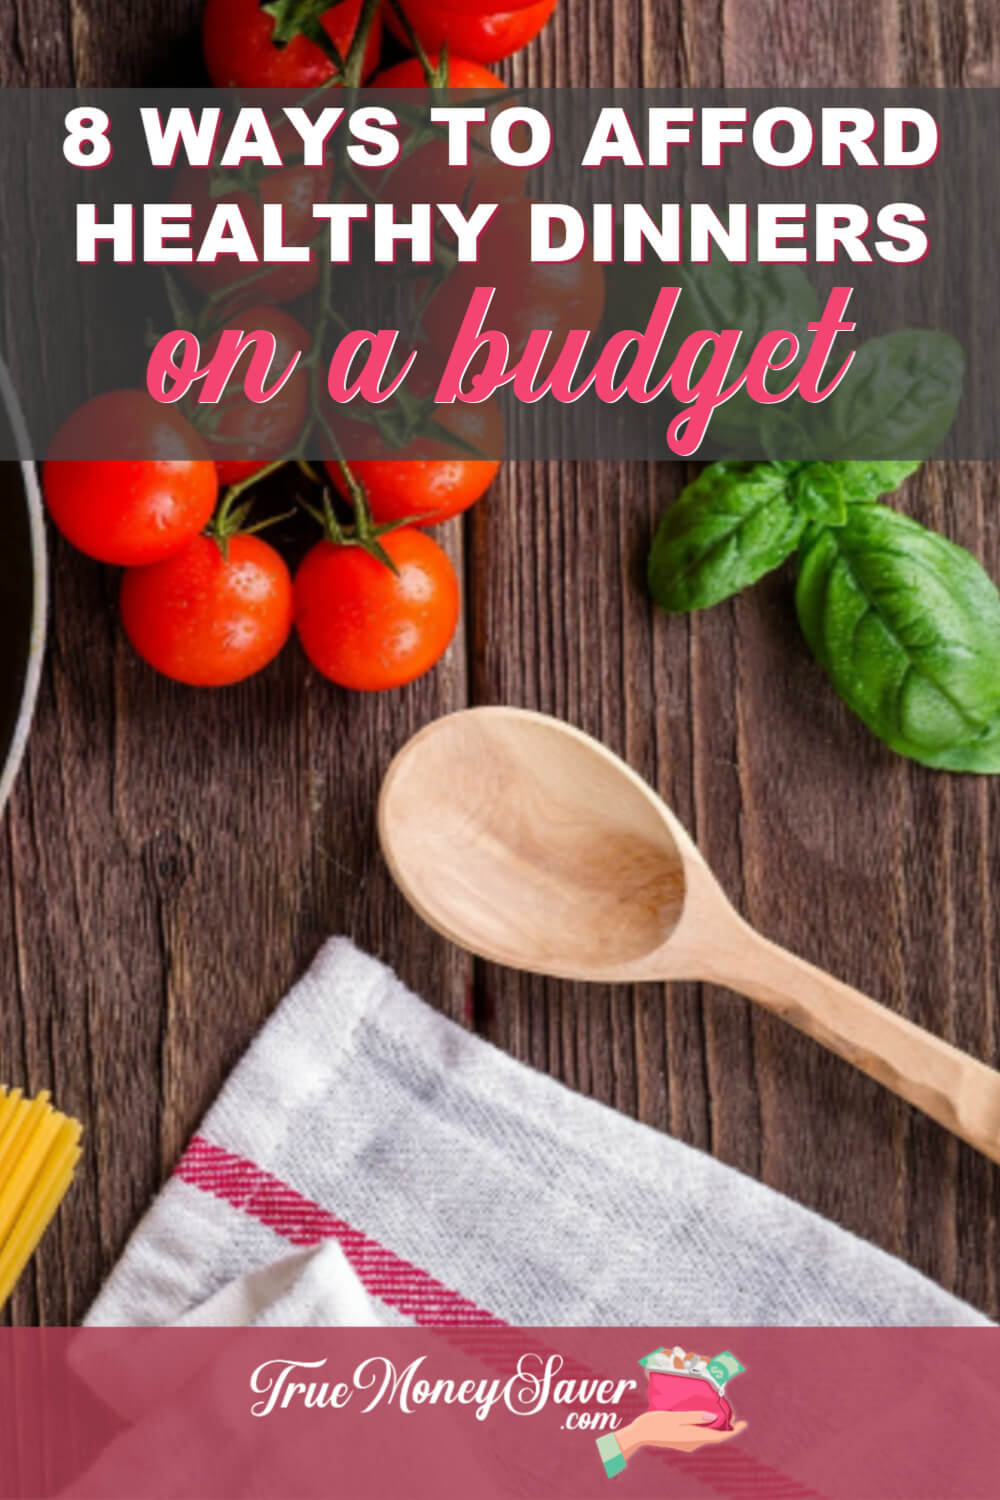 budget meal planning